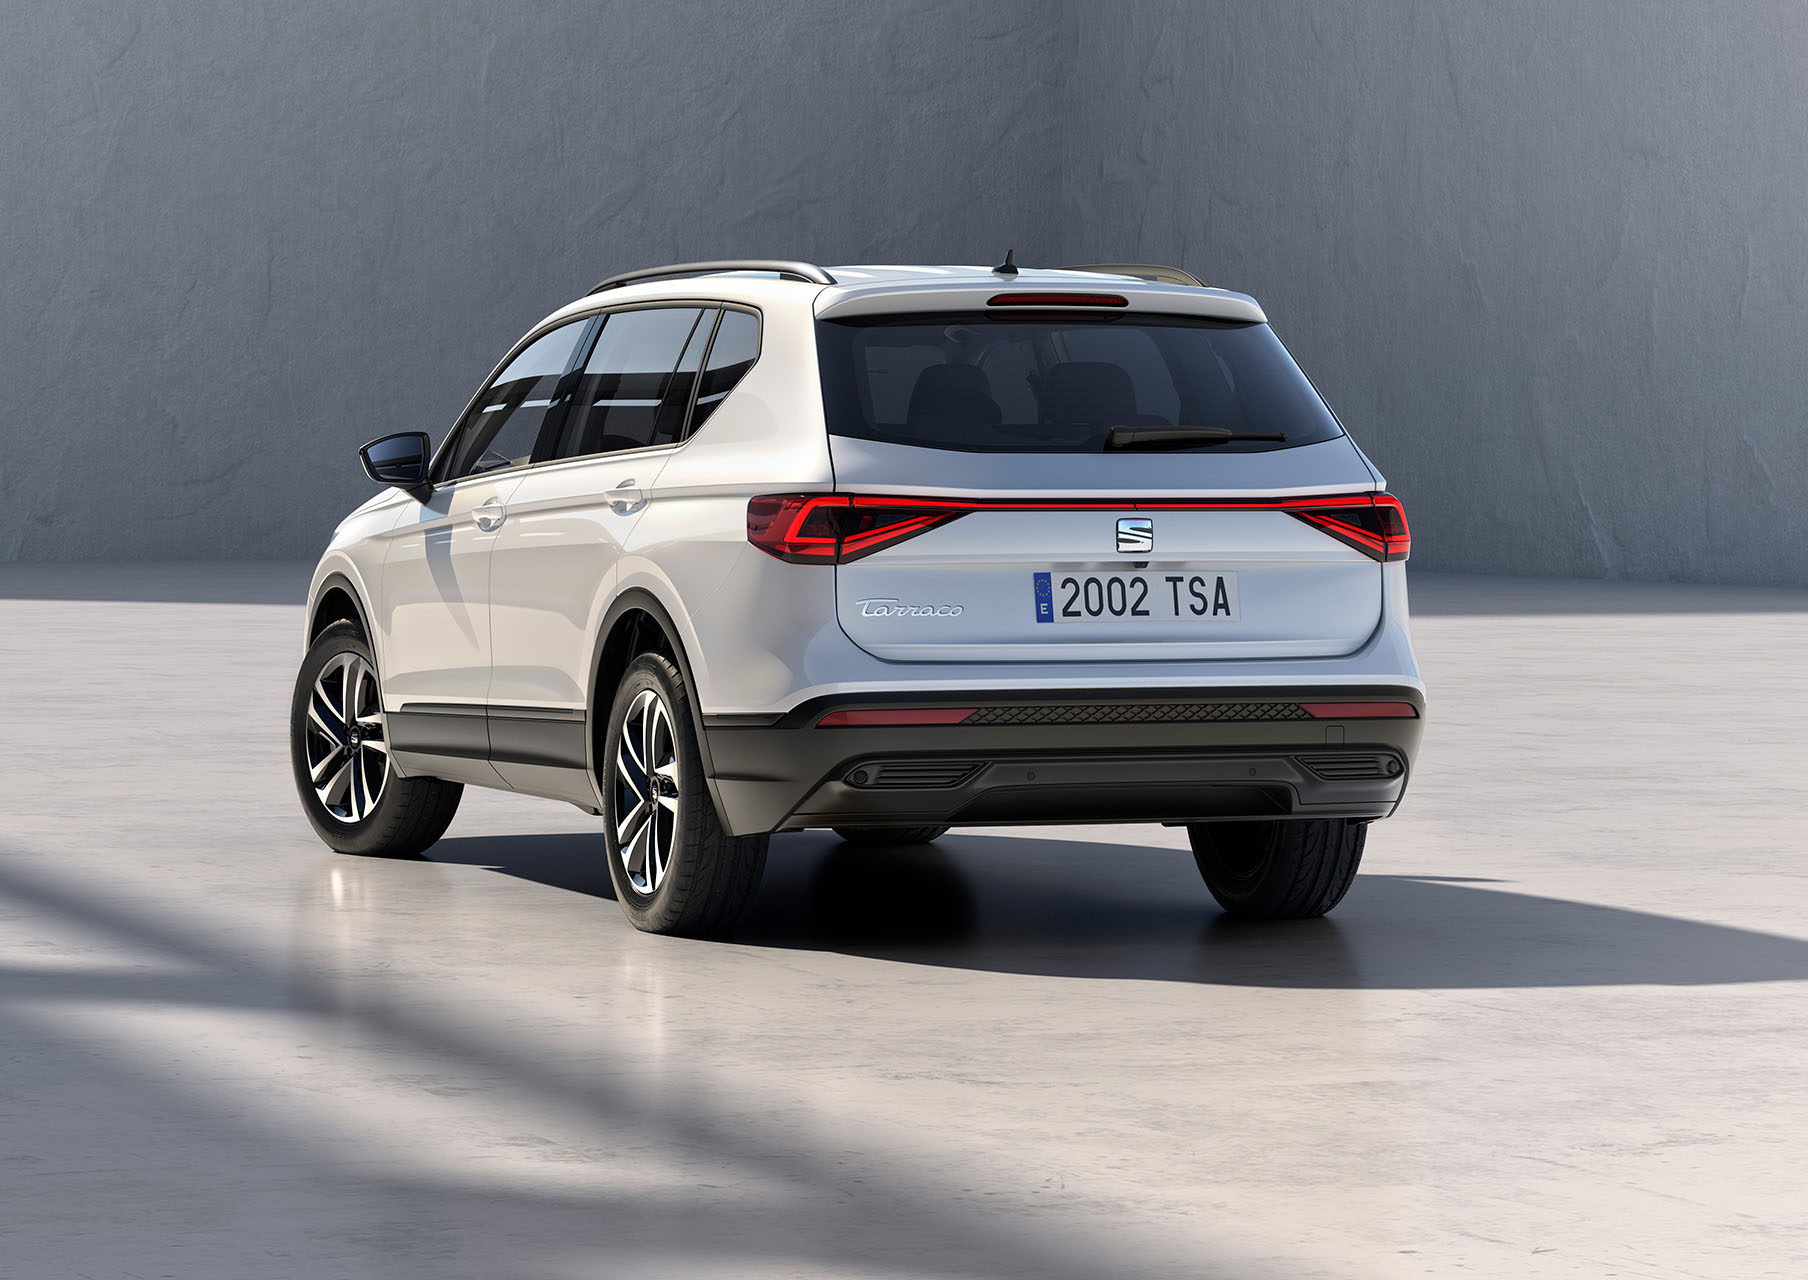 Rear view of the SEAT Tarraco  